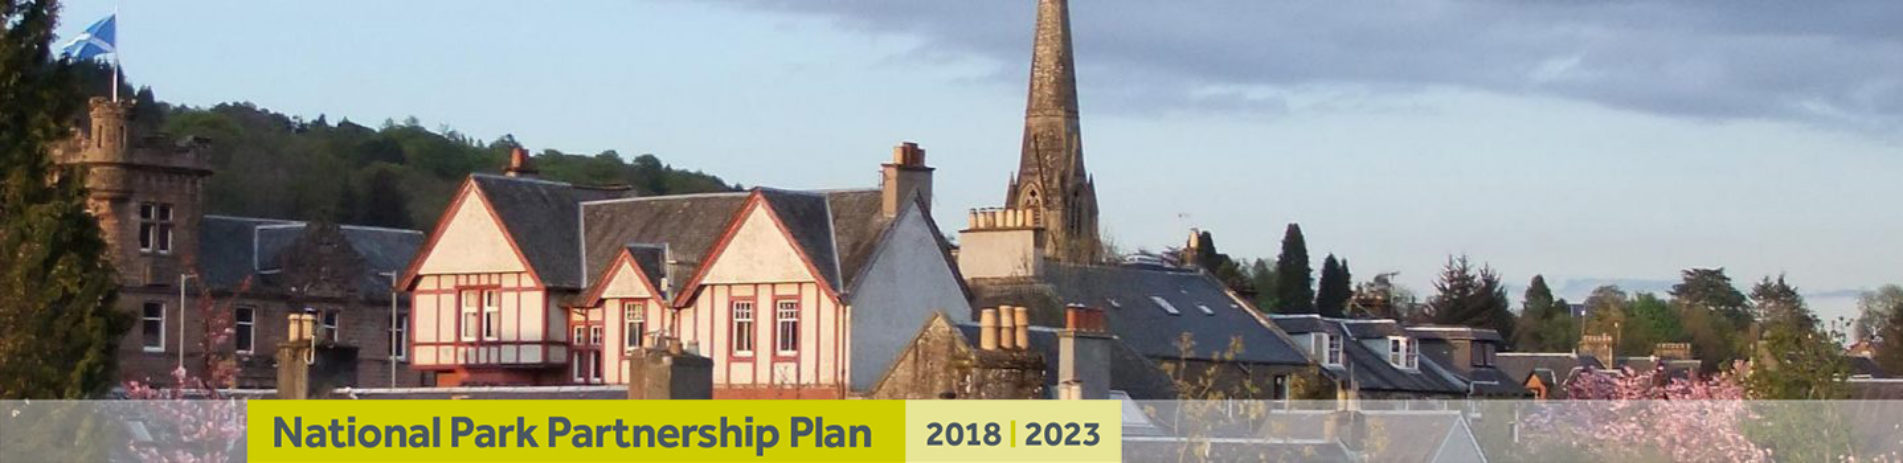 callander-town-houses-and-church-spire-with-banner-underneath-reading-national-park-partnership-plan-two-thousand-eighteen-two-thousand-twenty-three